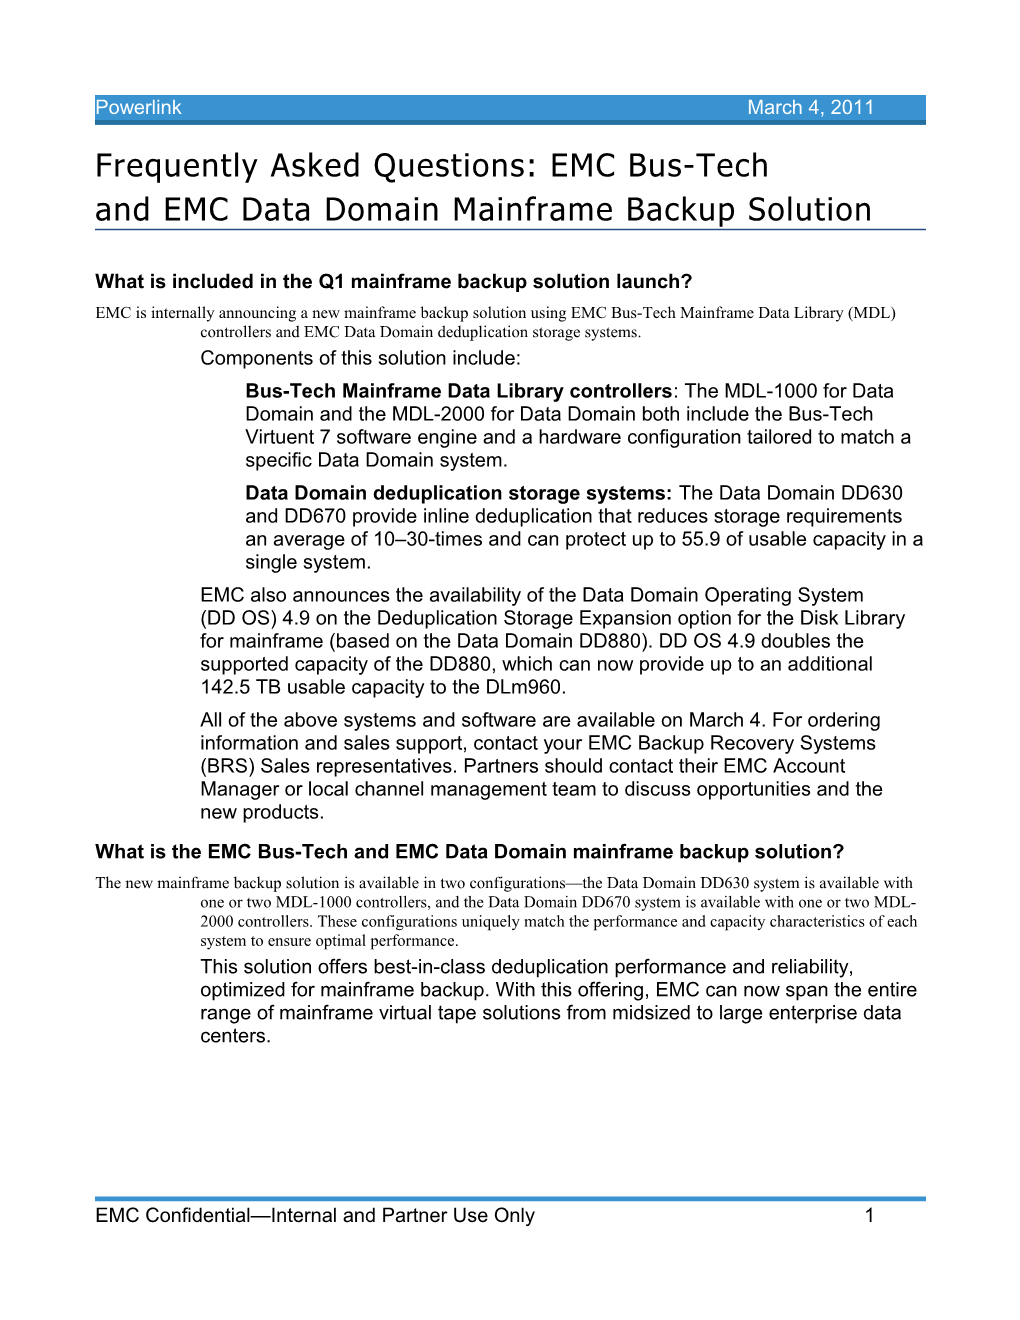 Question:What Is Included in the Q1mainframe Backup Solution Launch?